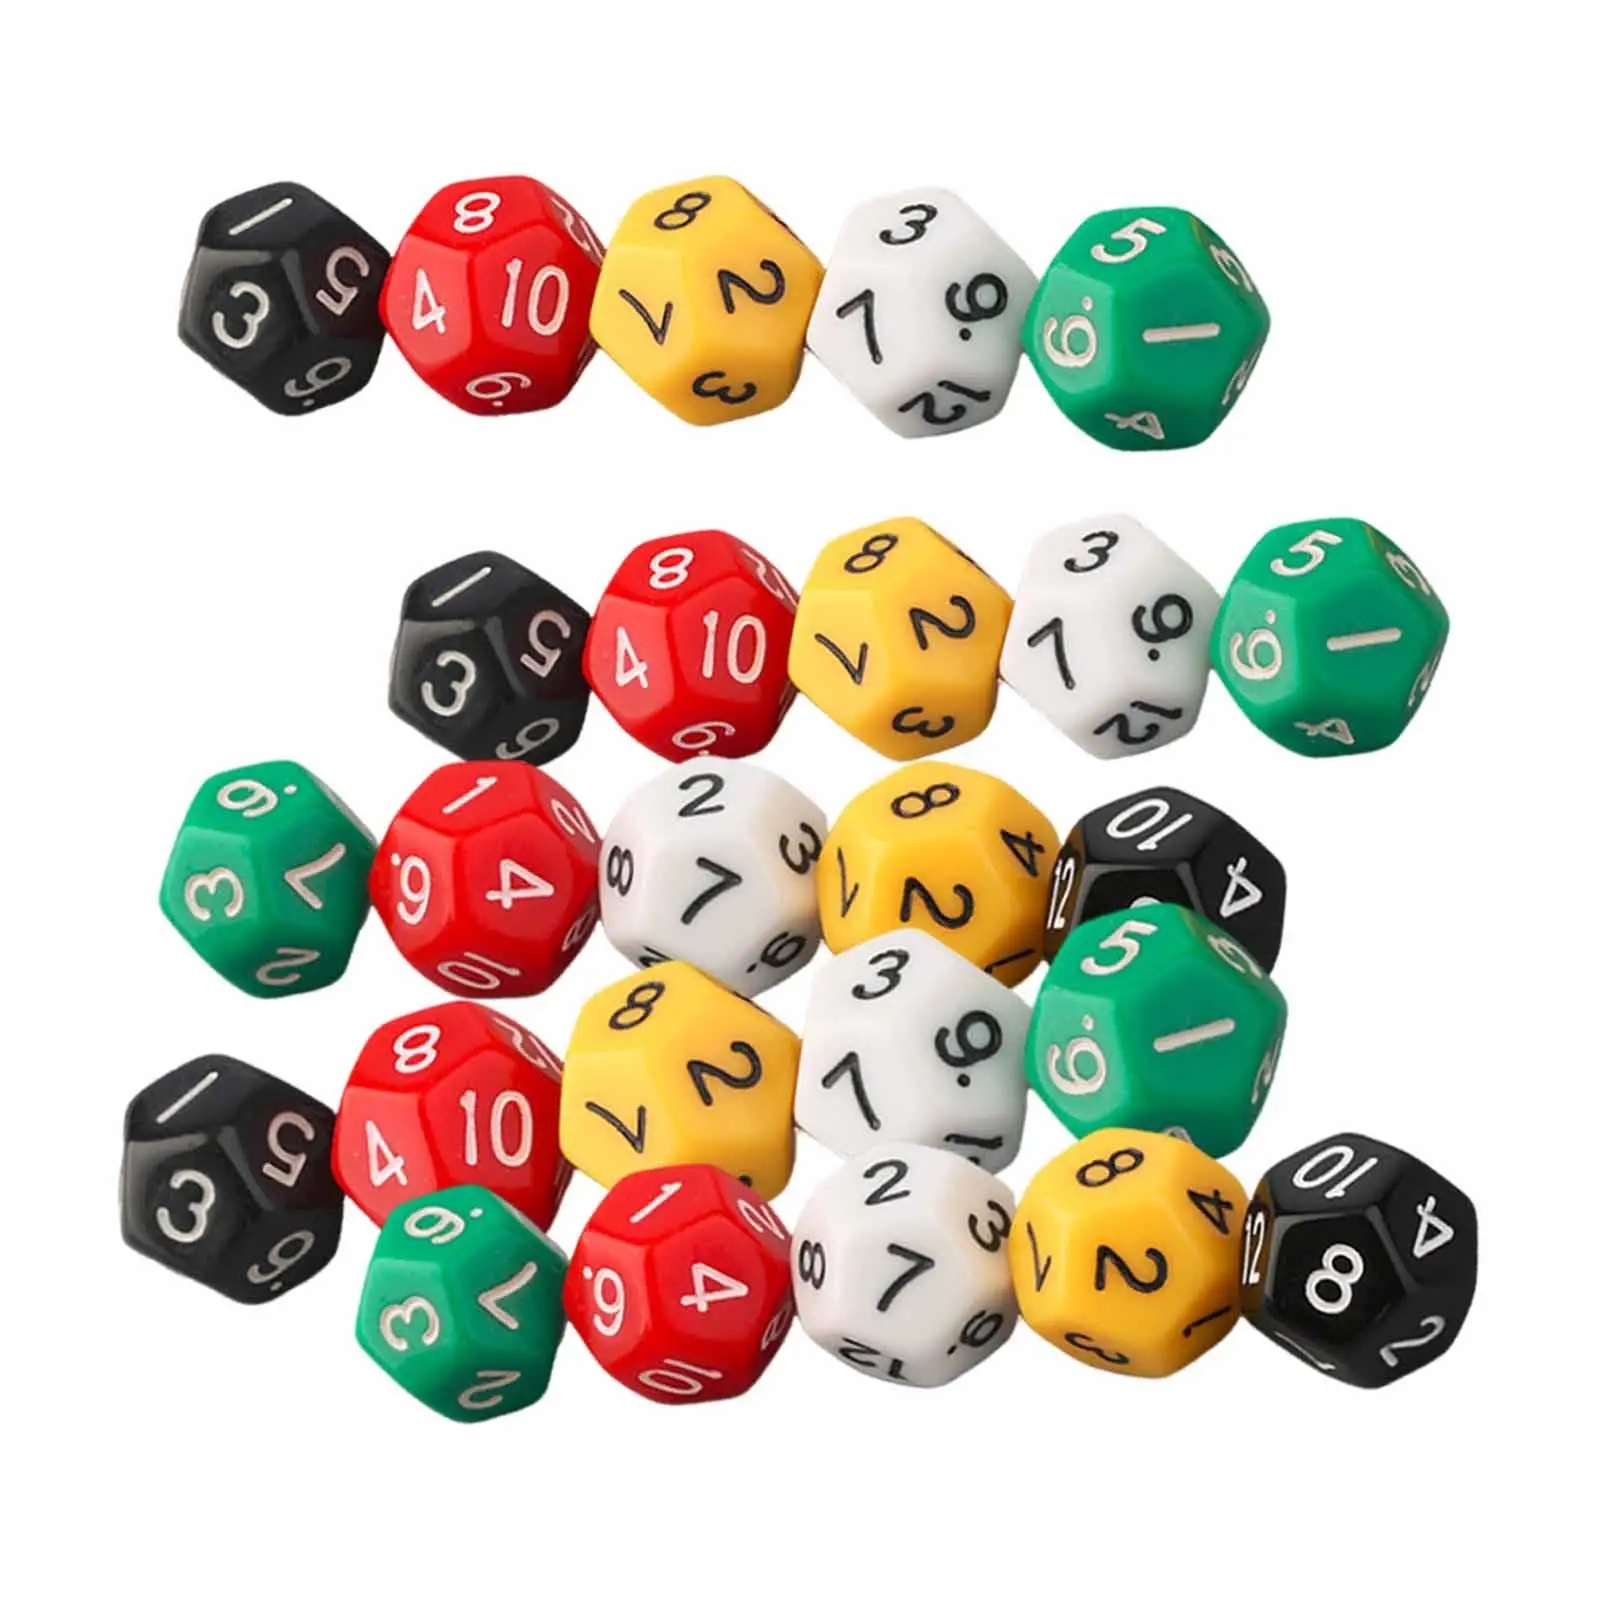 25x Polyhedral Dice Tabletop Game Gift Family Gatherings Multisided Dice